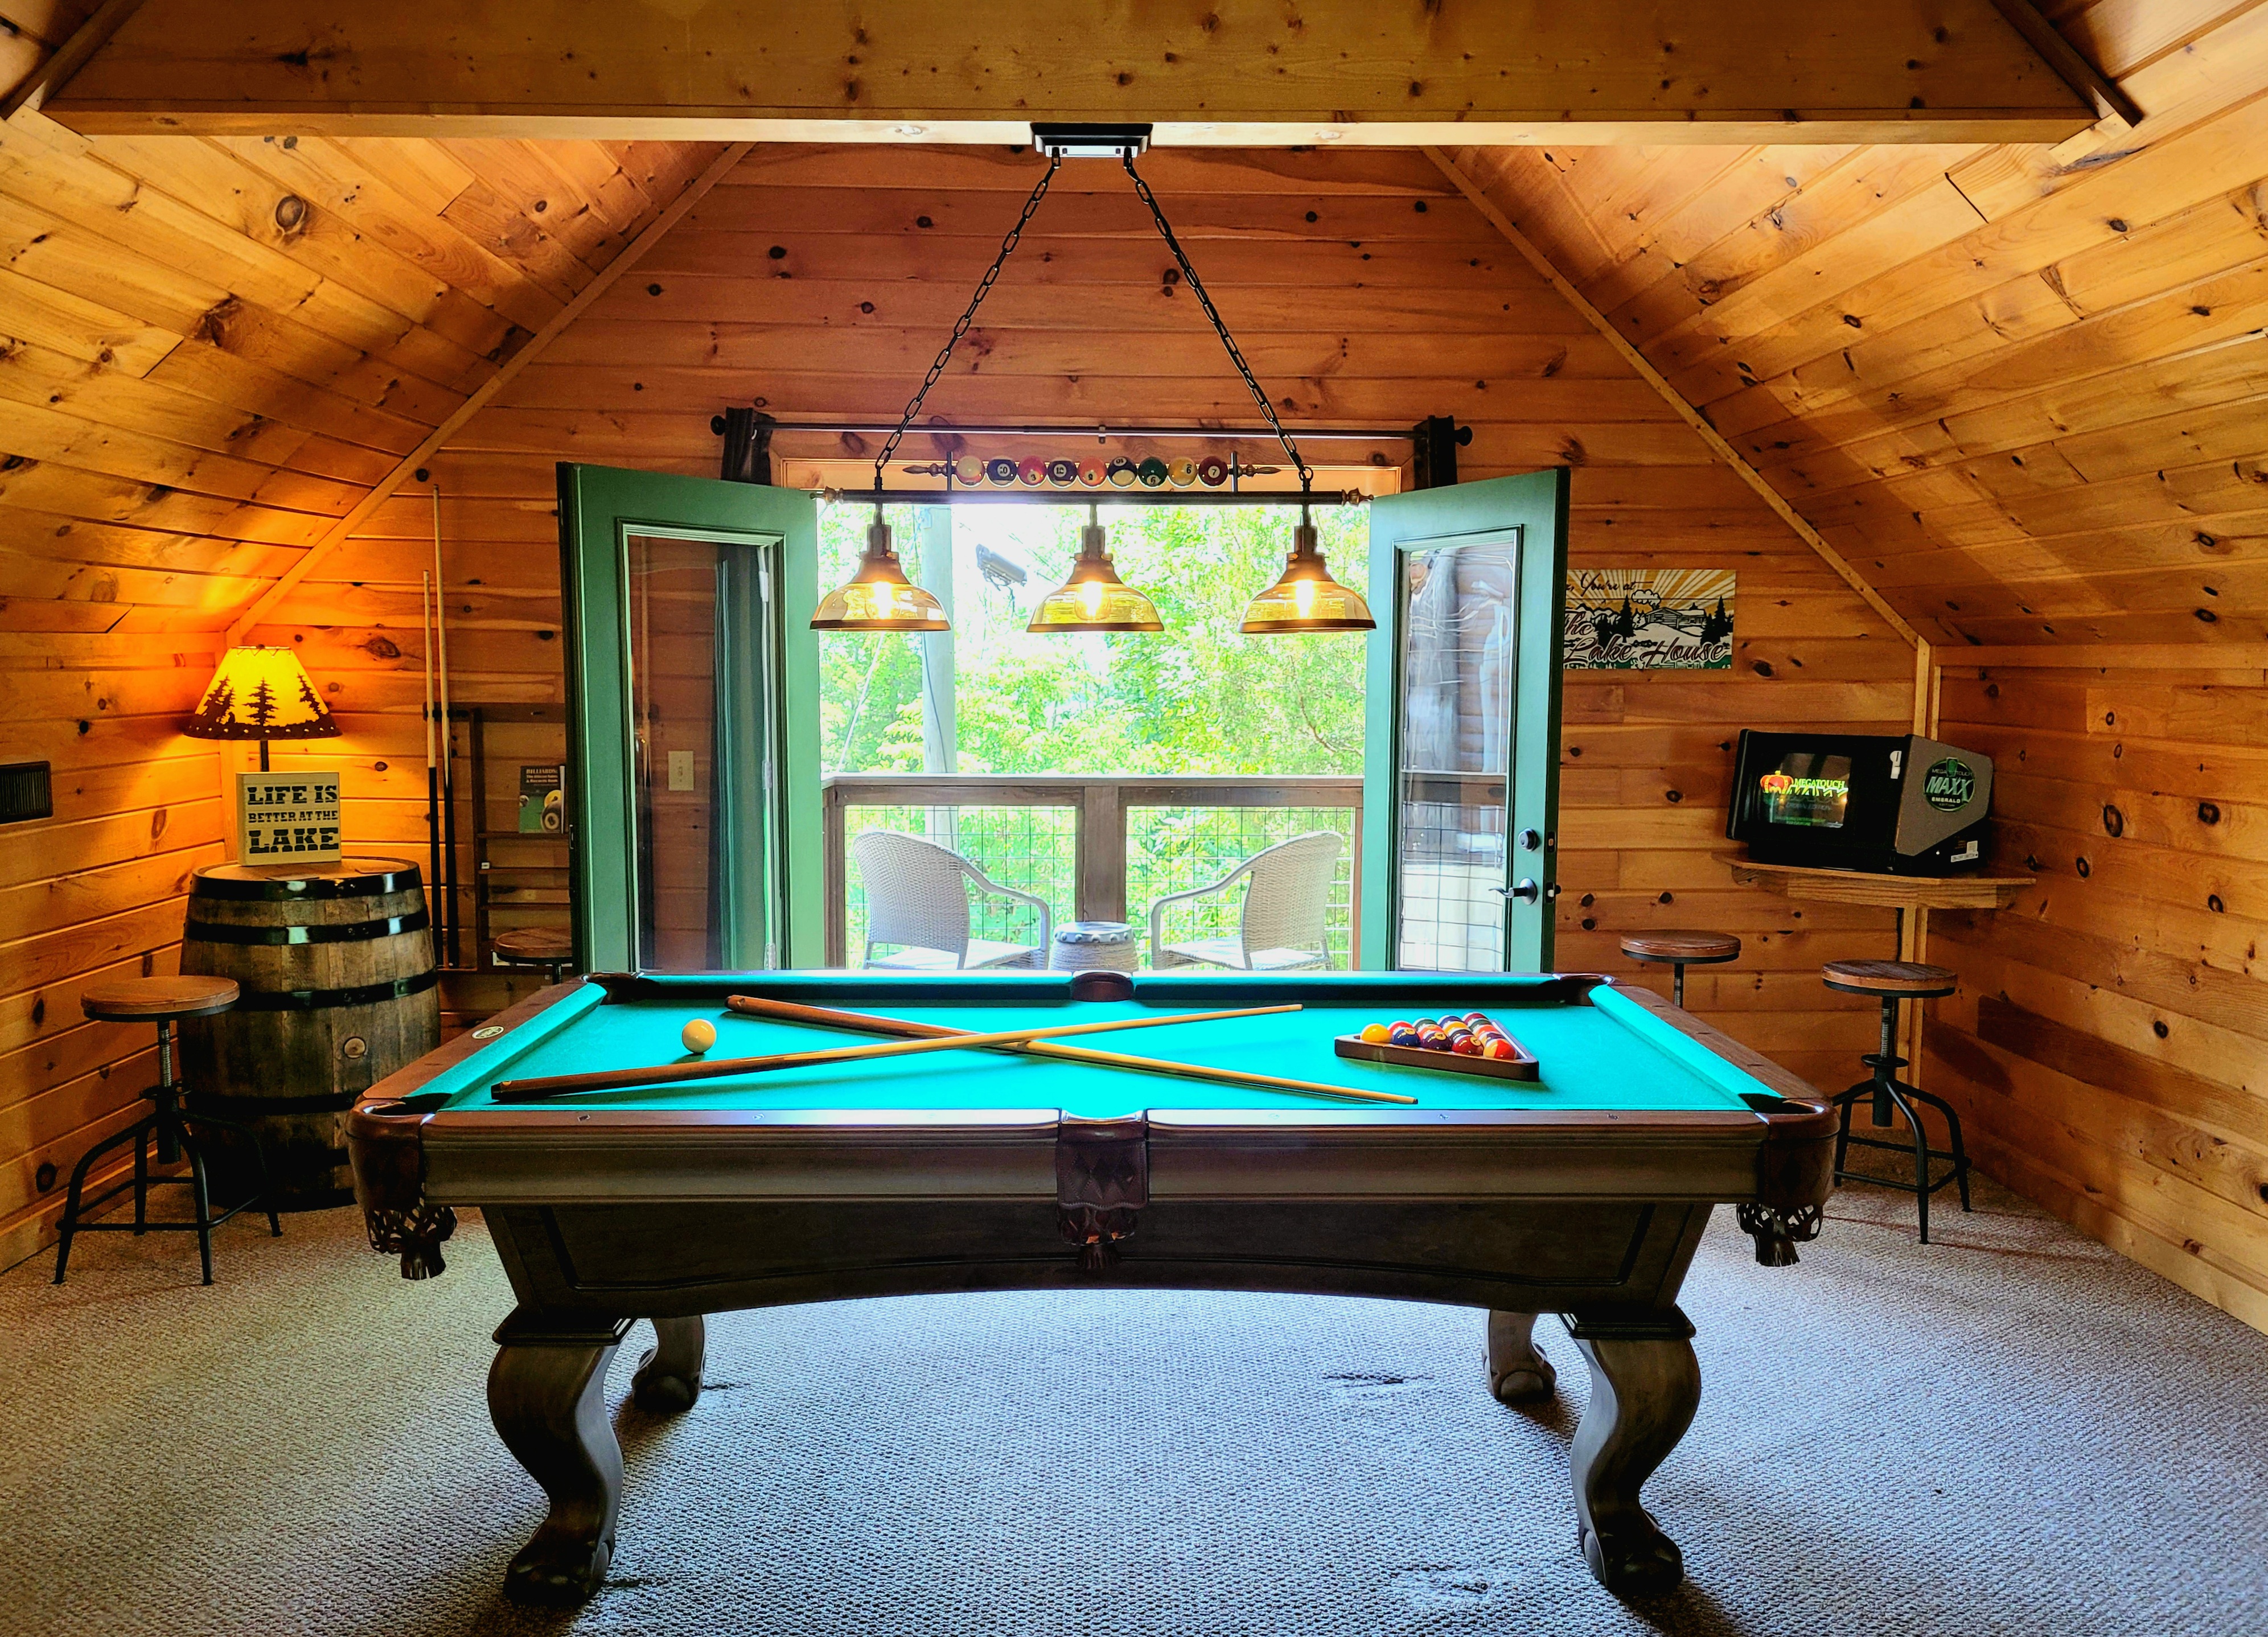 2BR Cabin! Hot Tub, Game Room w/ Pool Table, Views - Cabins for Rent in  Sevierville, Tennessee, United States - Airbnb